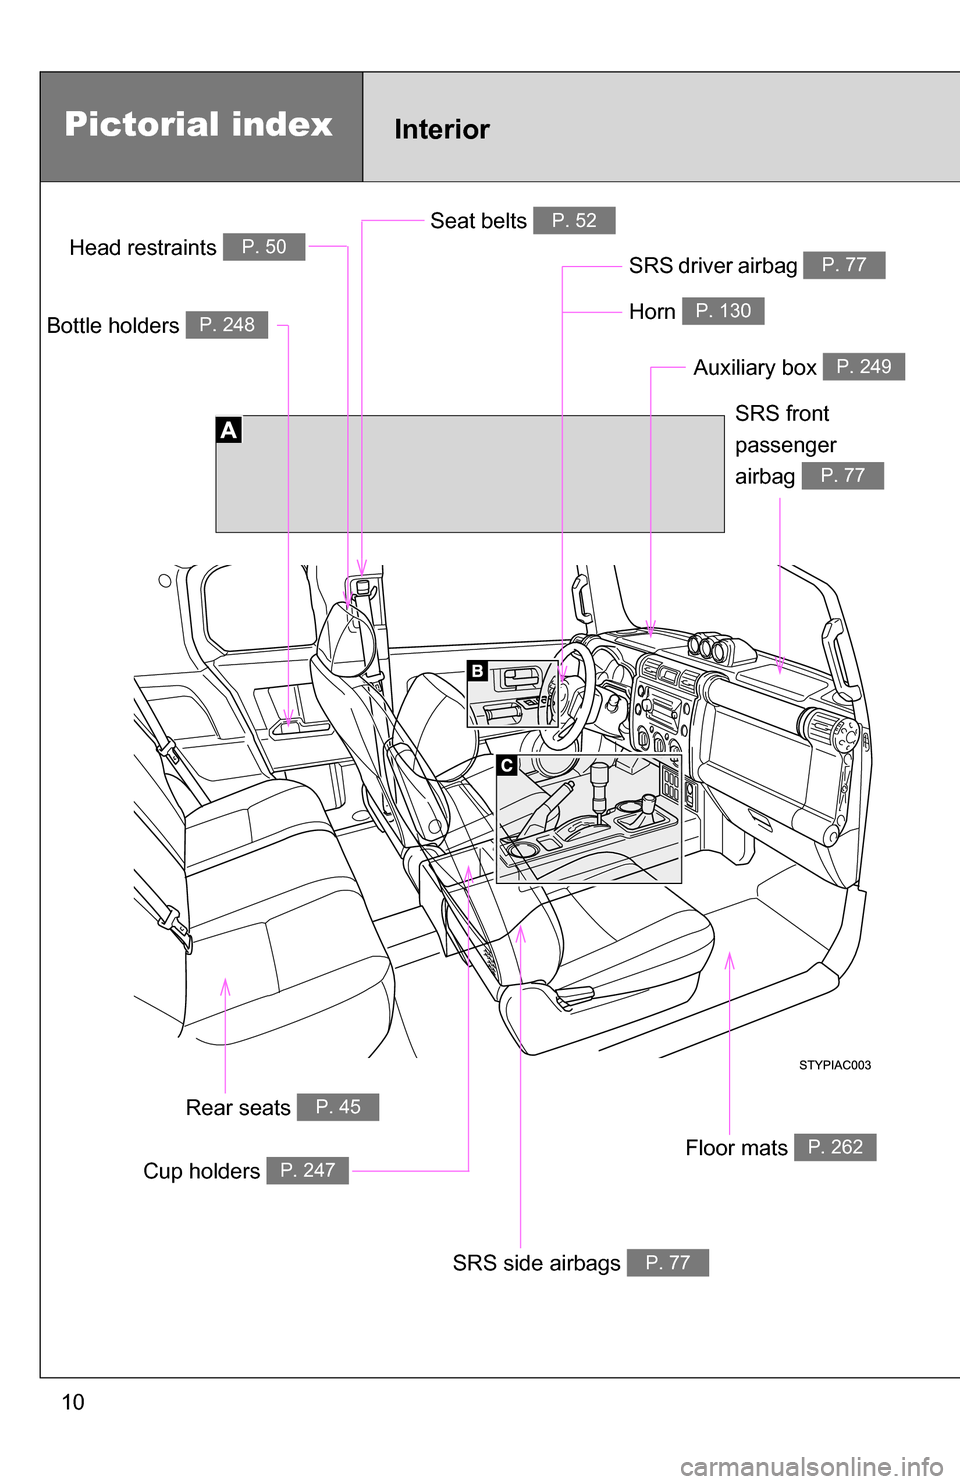 TOYOTA FJ CRUISER 2009 1.G Owners Manual 10
Pictorial indexInterior
Seat belts P. 52
SRS driver airbag P. 77Head restraints P. 50
Bottle holders P. 248
Cup holders P. 247
SRS side airbags P. 77
Floor mats P. 262
SRS front 
passenger
airbag 
